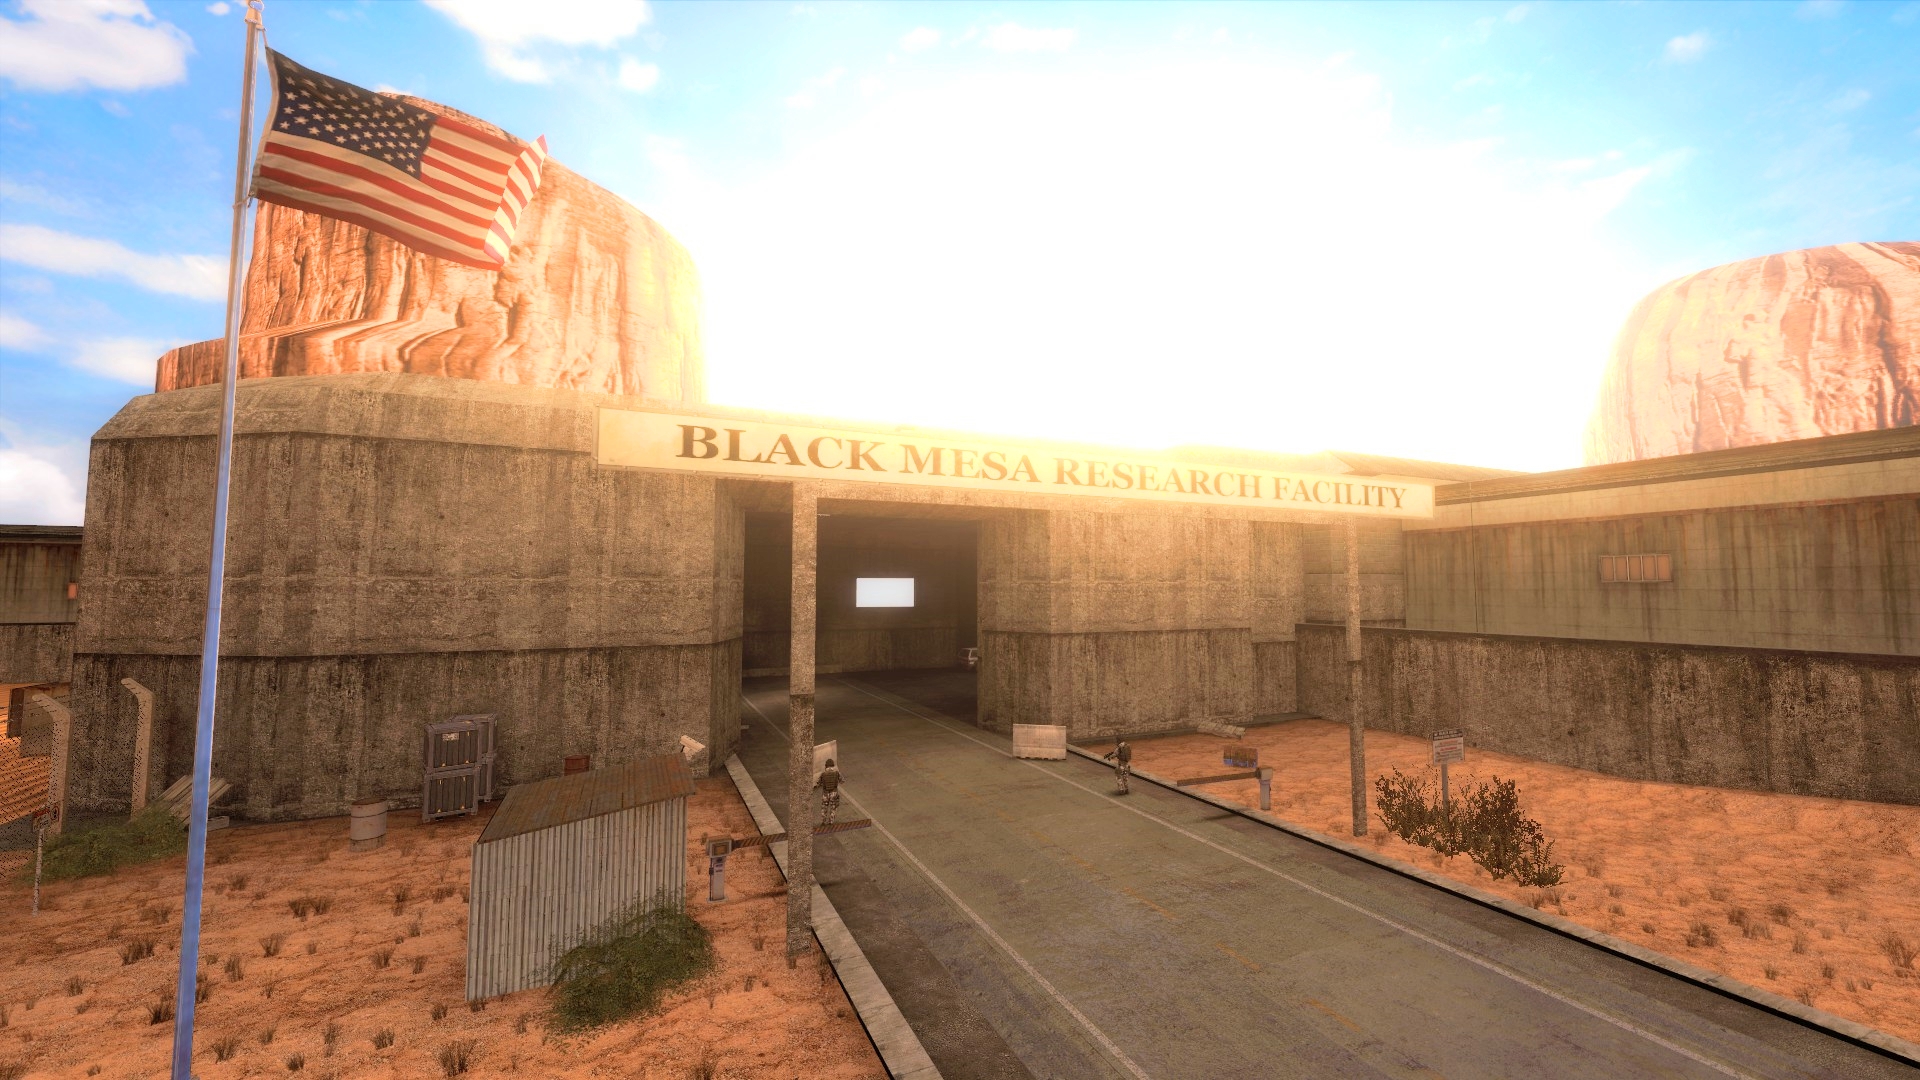 black mesa research facility email address